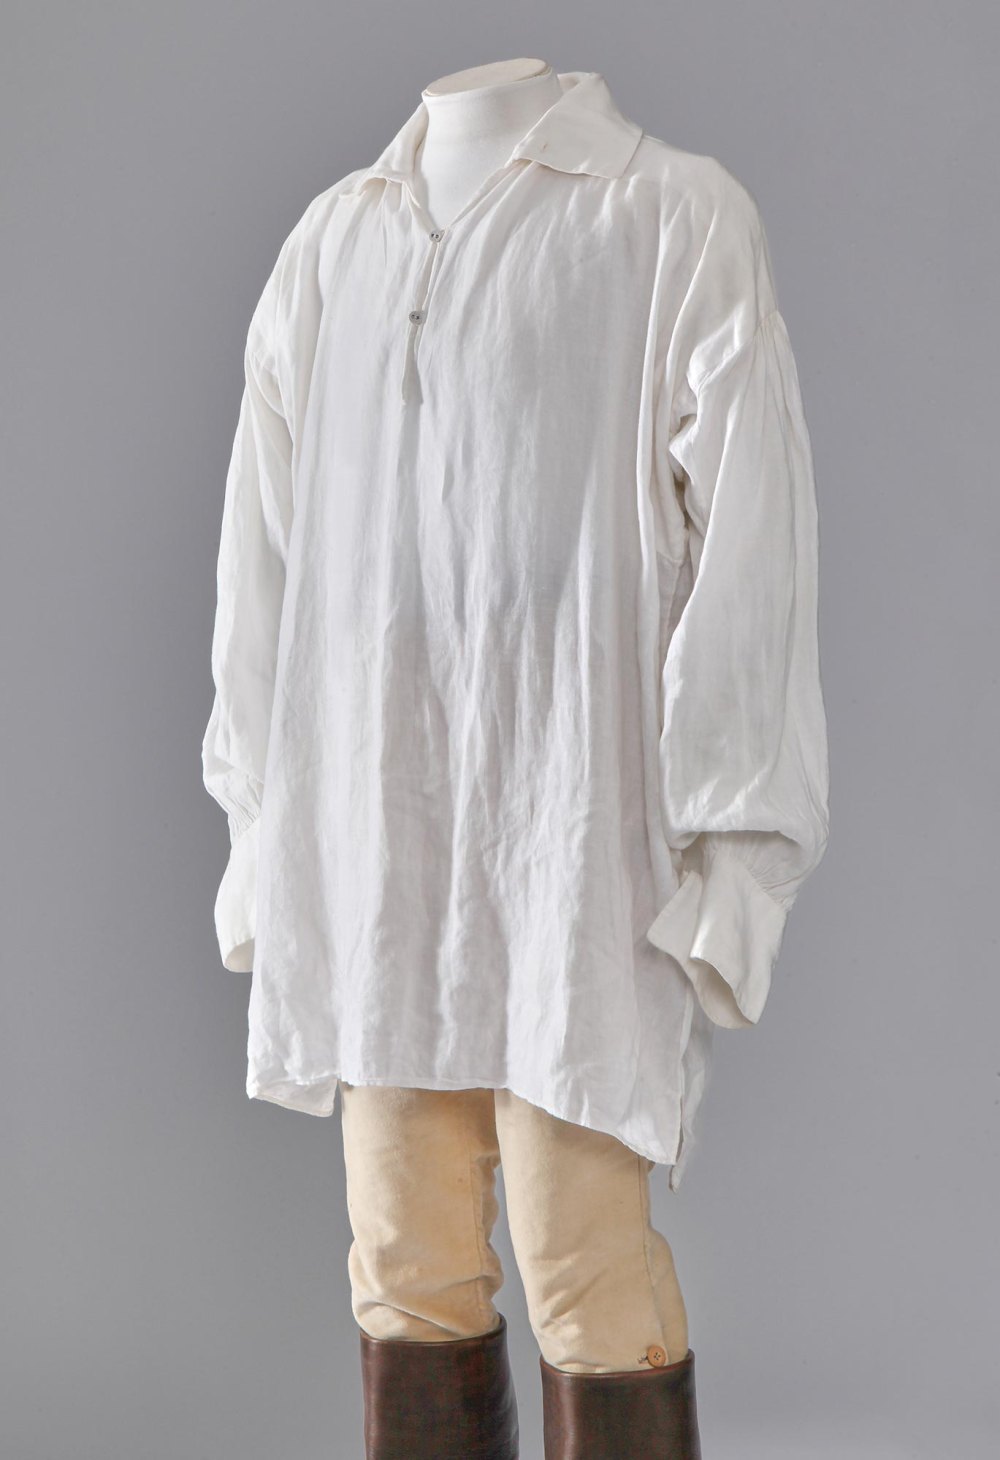 Attention Mr. Darcy Lovers! Colin Firth's Iconic 'Pride and Prejudice' Wet Shirt Is up for Auction